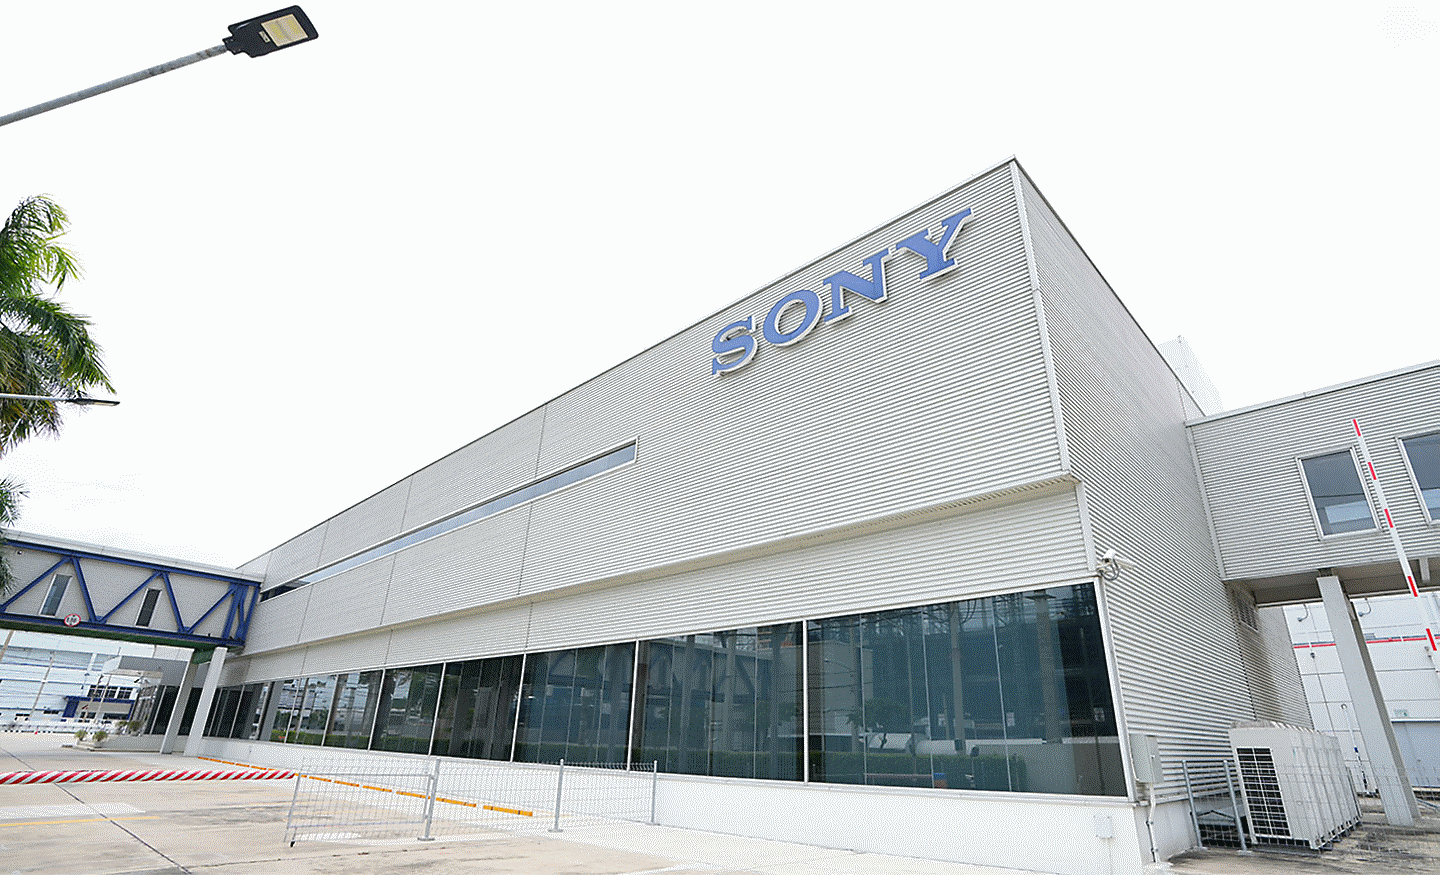 Image of the outside of a Sony building